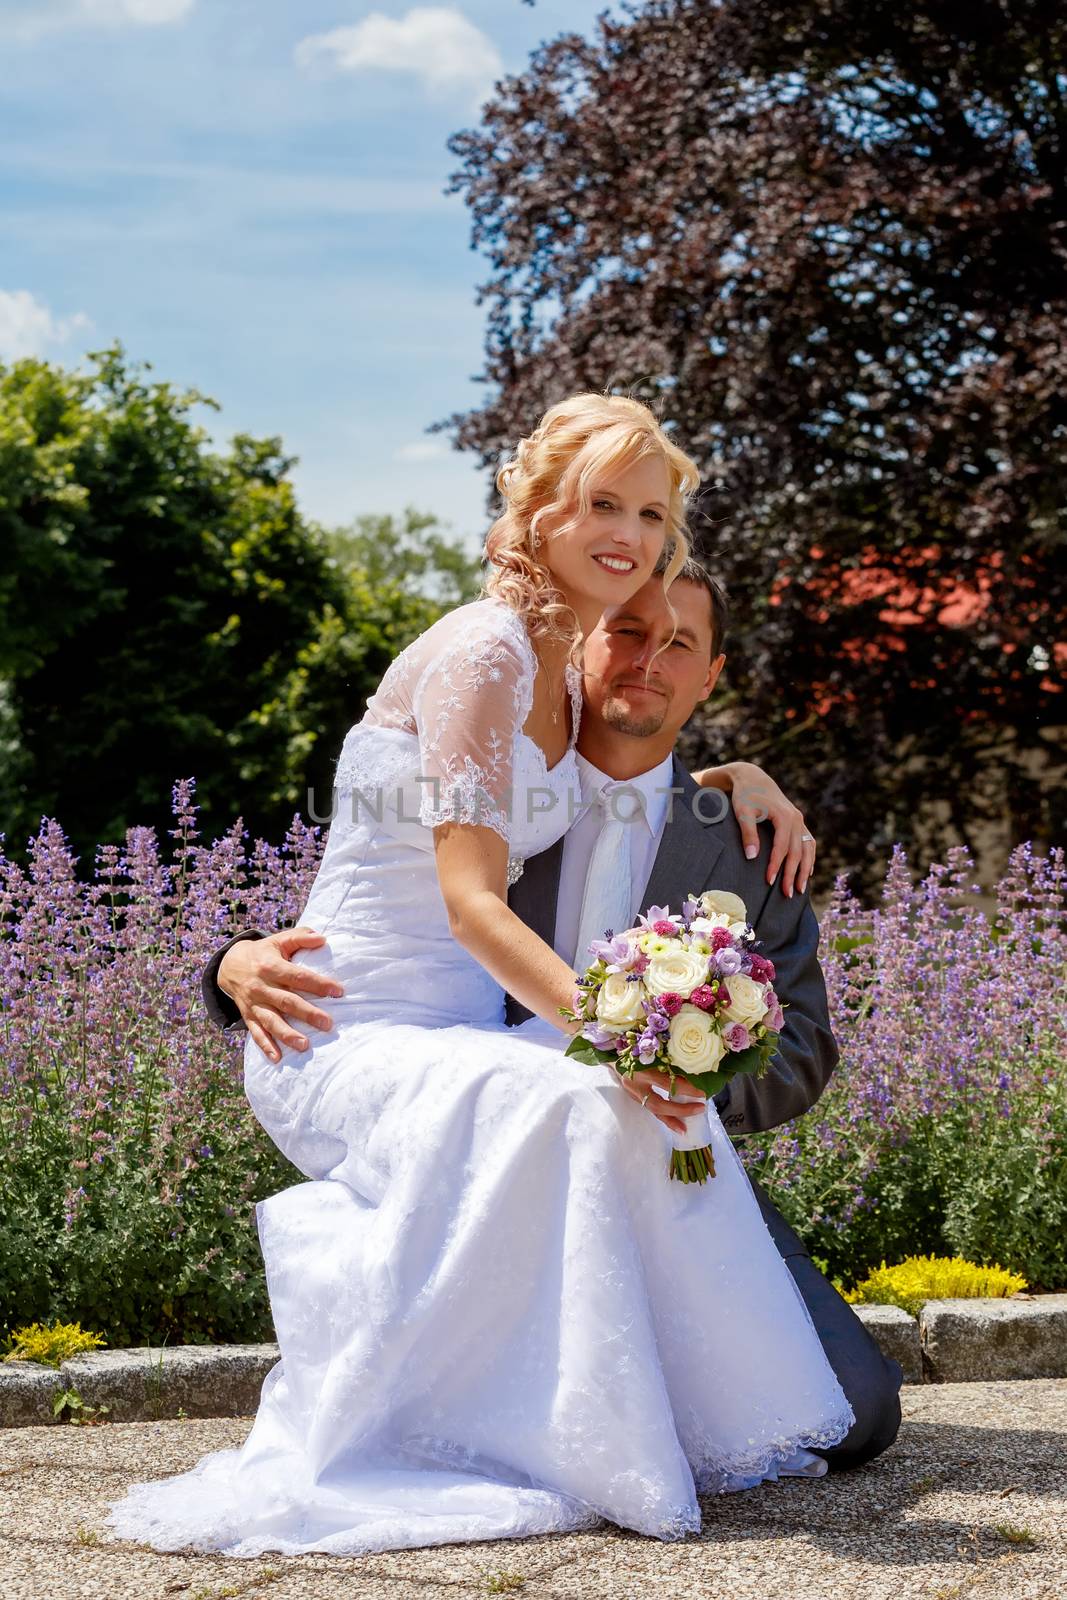 beautiful young wedding couple, blonde bride and her groom against lavender flower